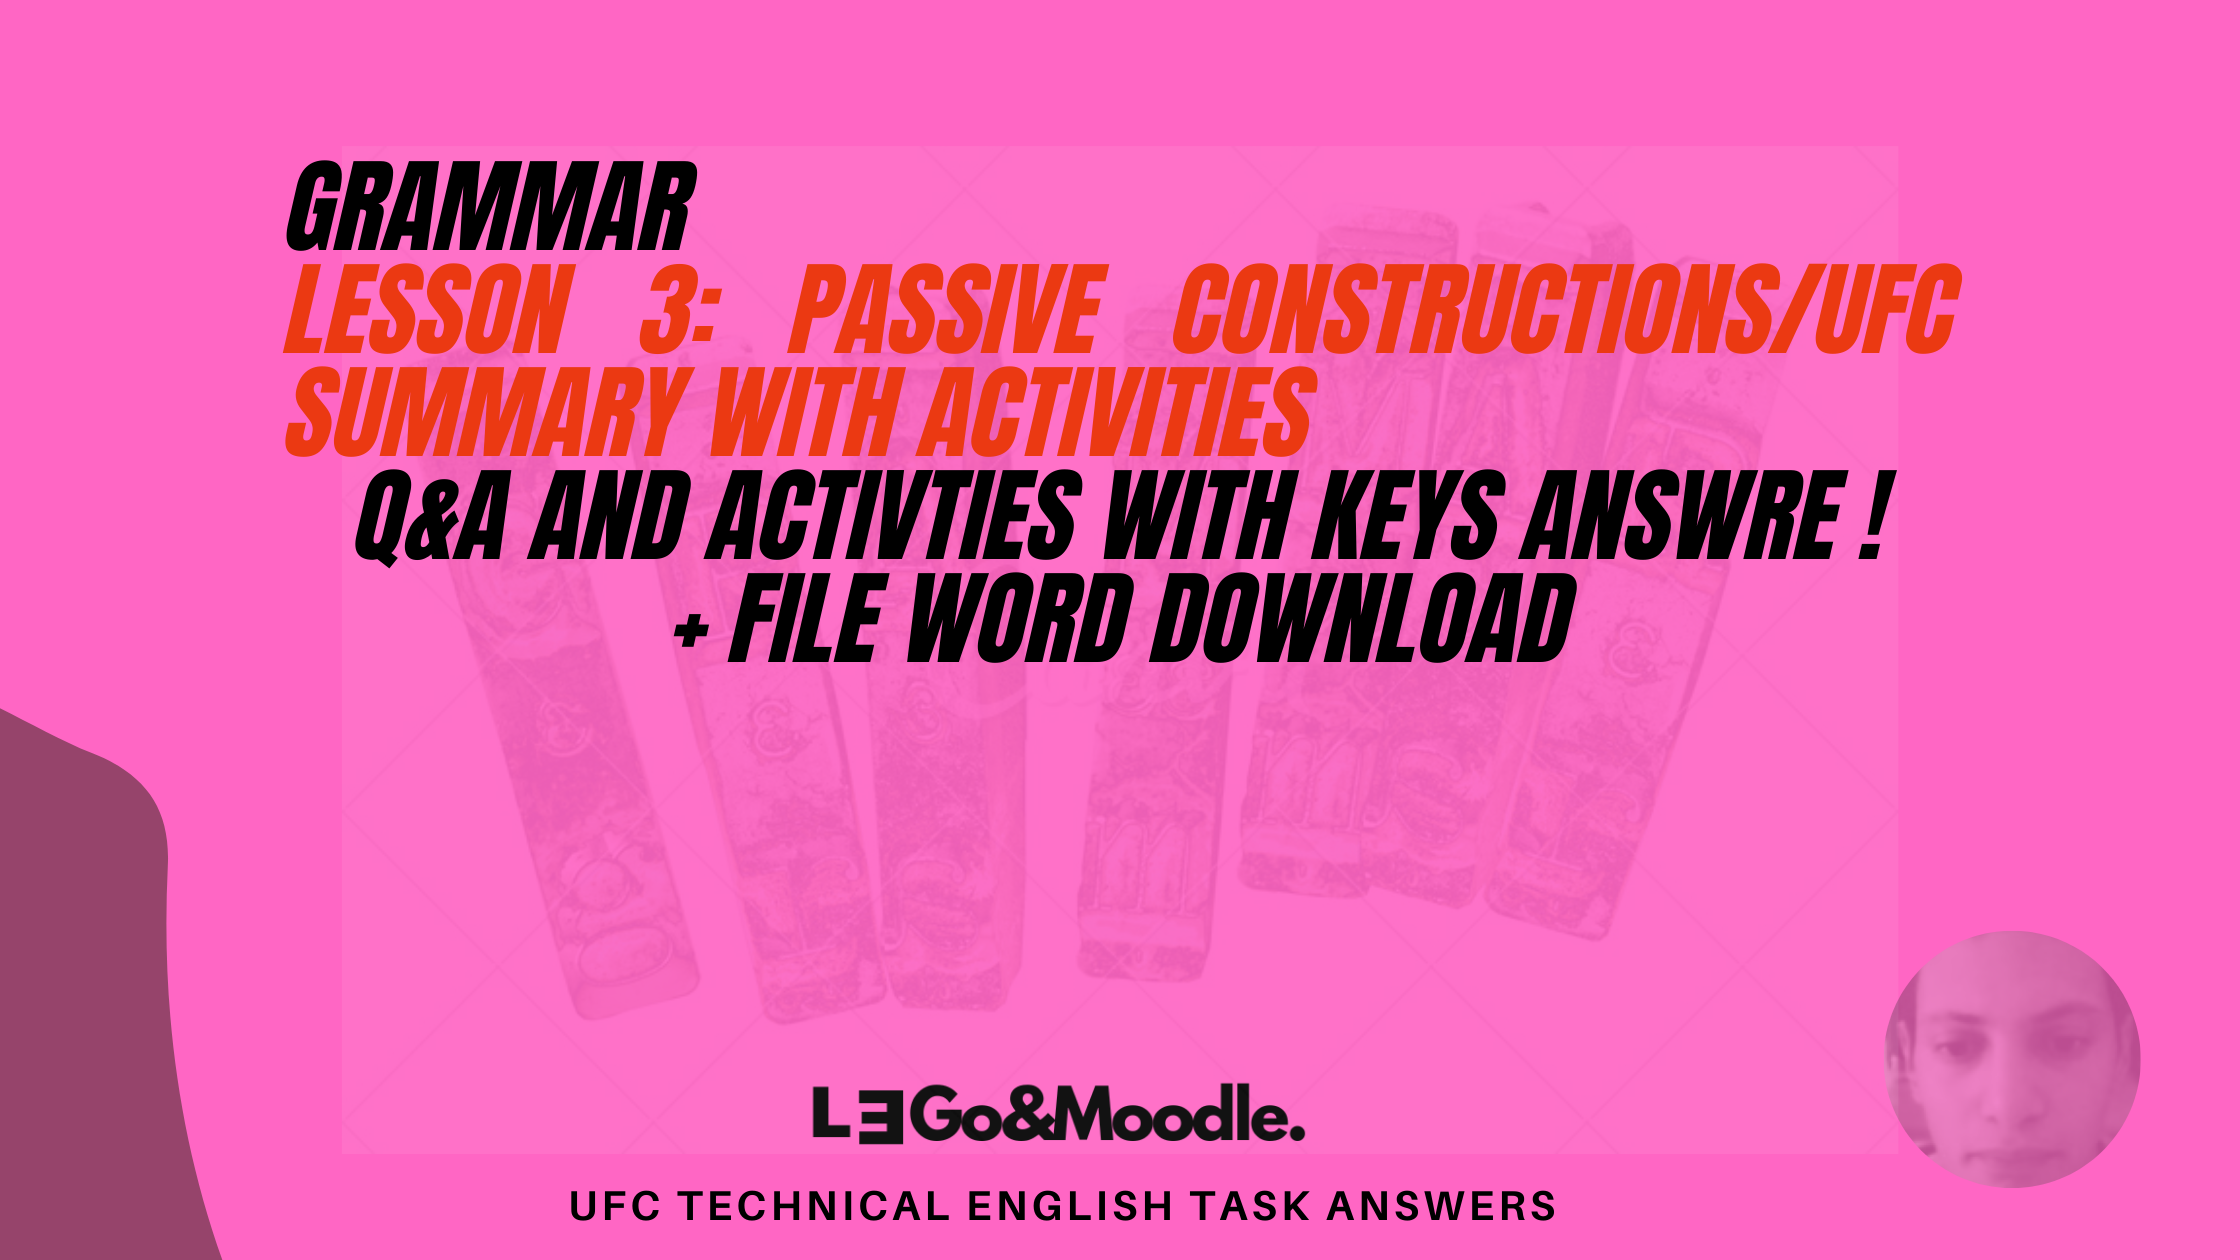 Lesson 3: Passive Constructions/UFC summary with activities